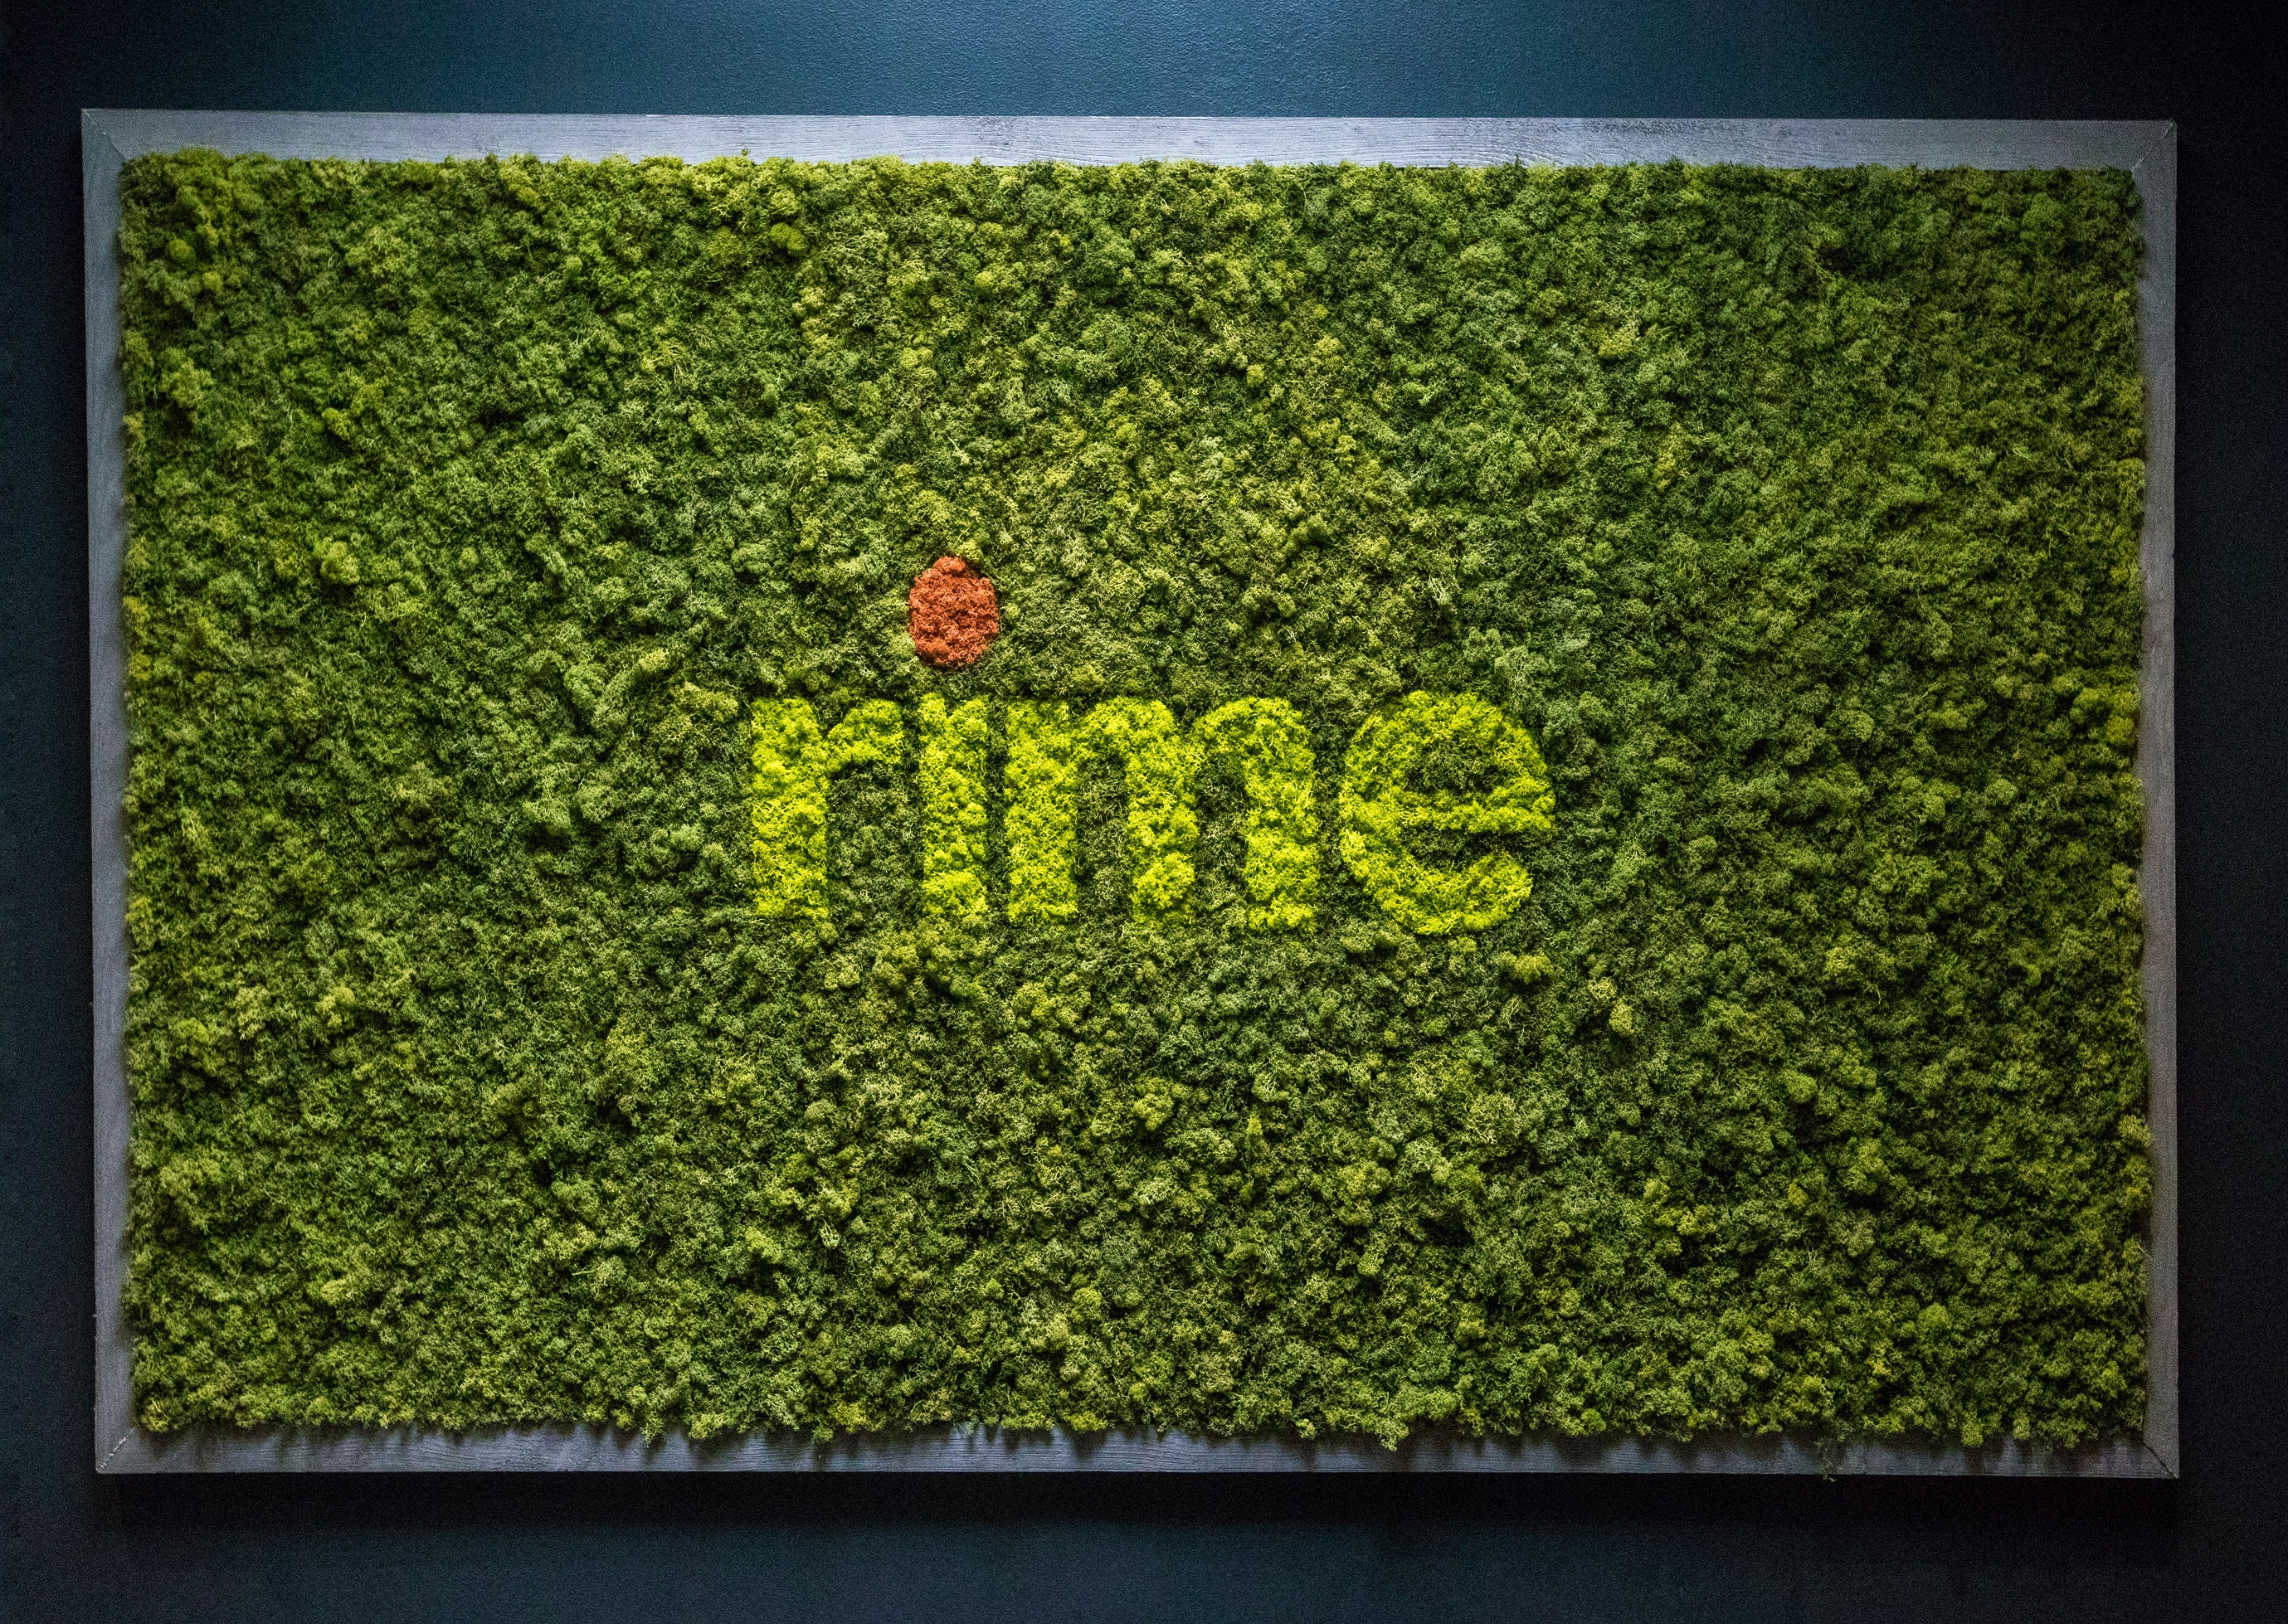 Incorporating the client's logo with contrasting shades of reindeer moss makes the letters pop against a textured background.